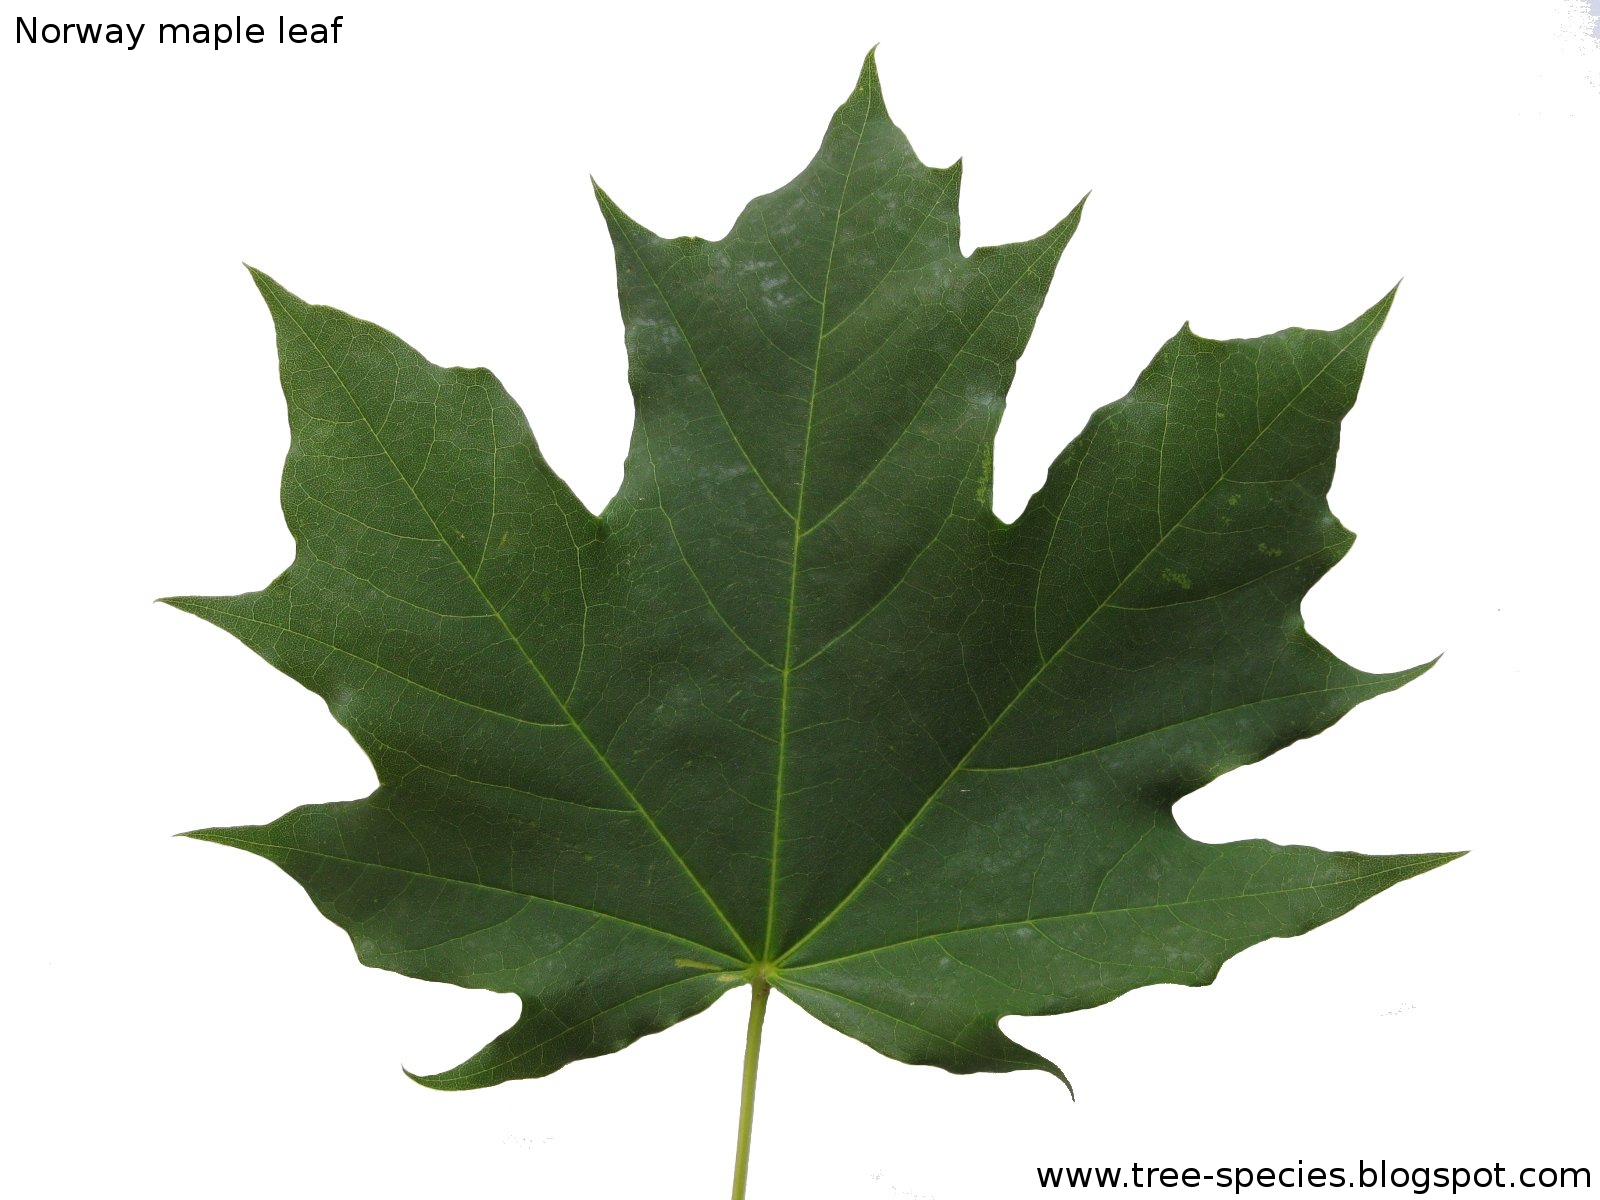 The World´s Tree Species: Norway maple leaf